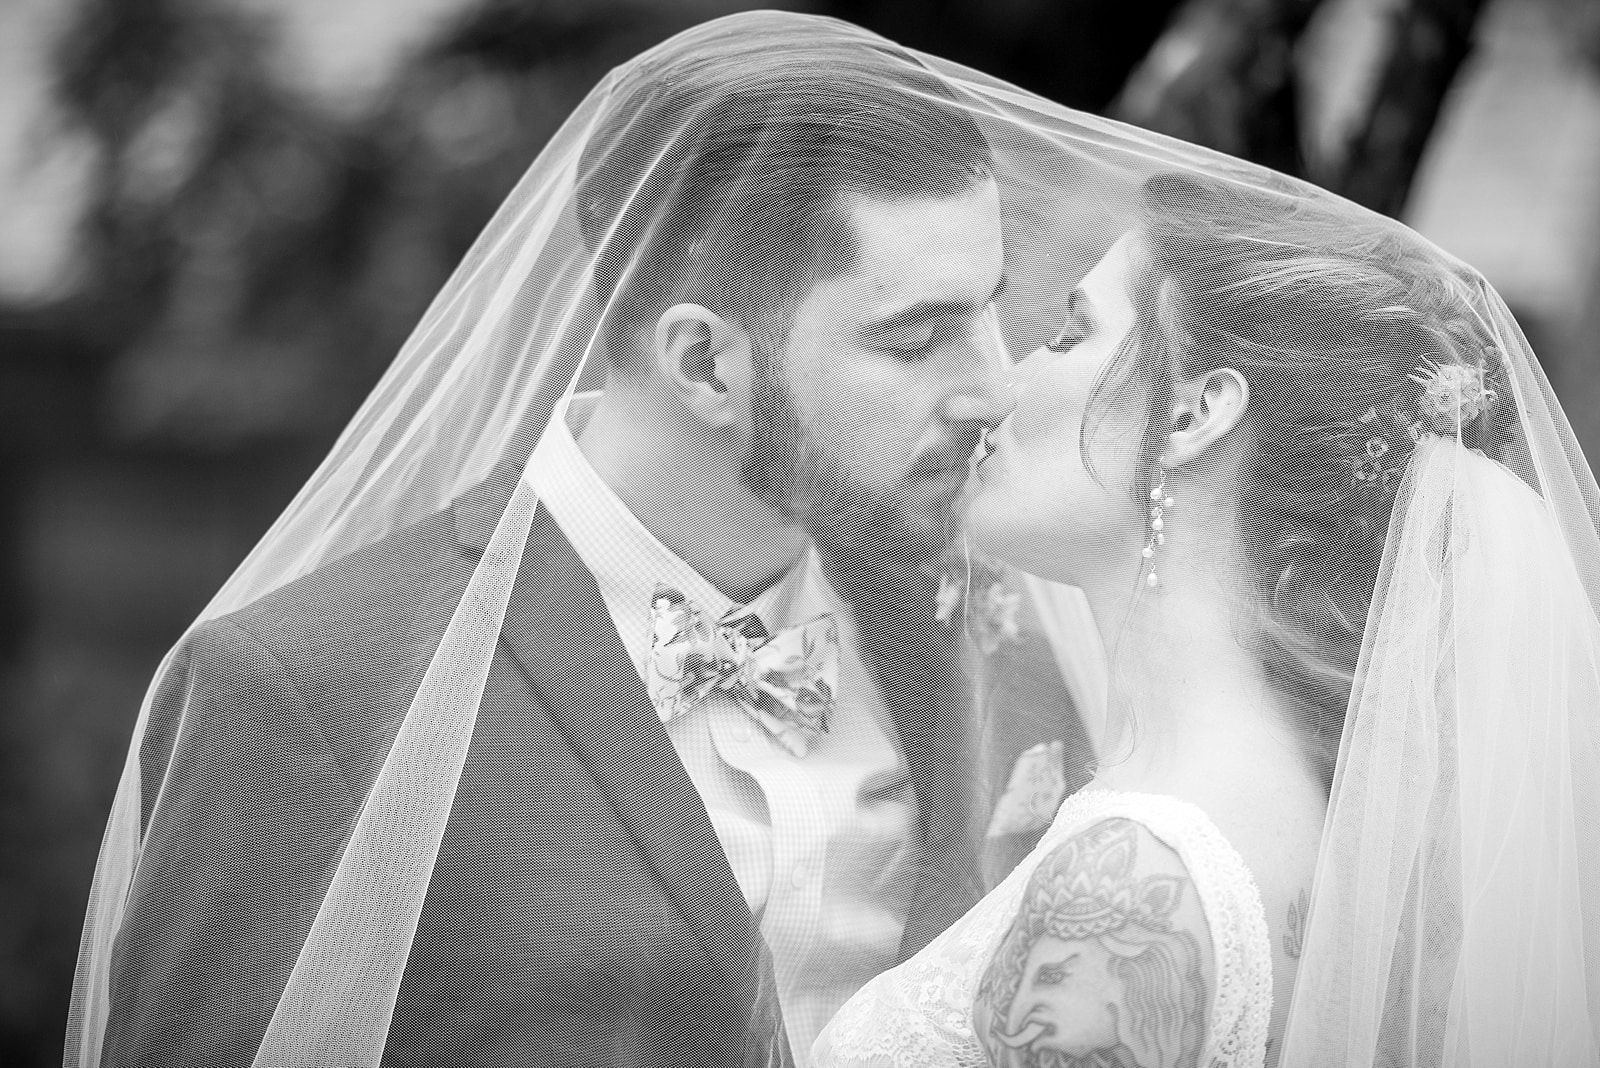 black & white wedding portraits of tattooed bride and groom at the Inn at Millrace Pond